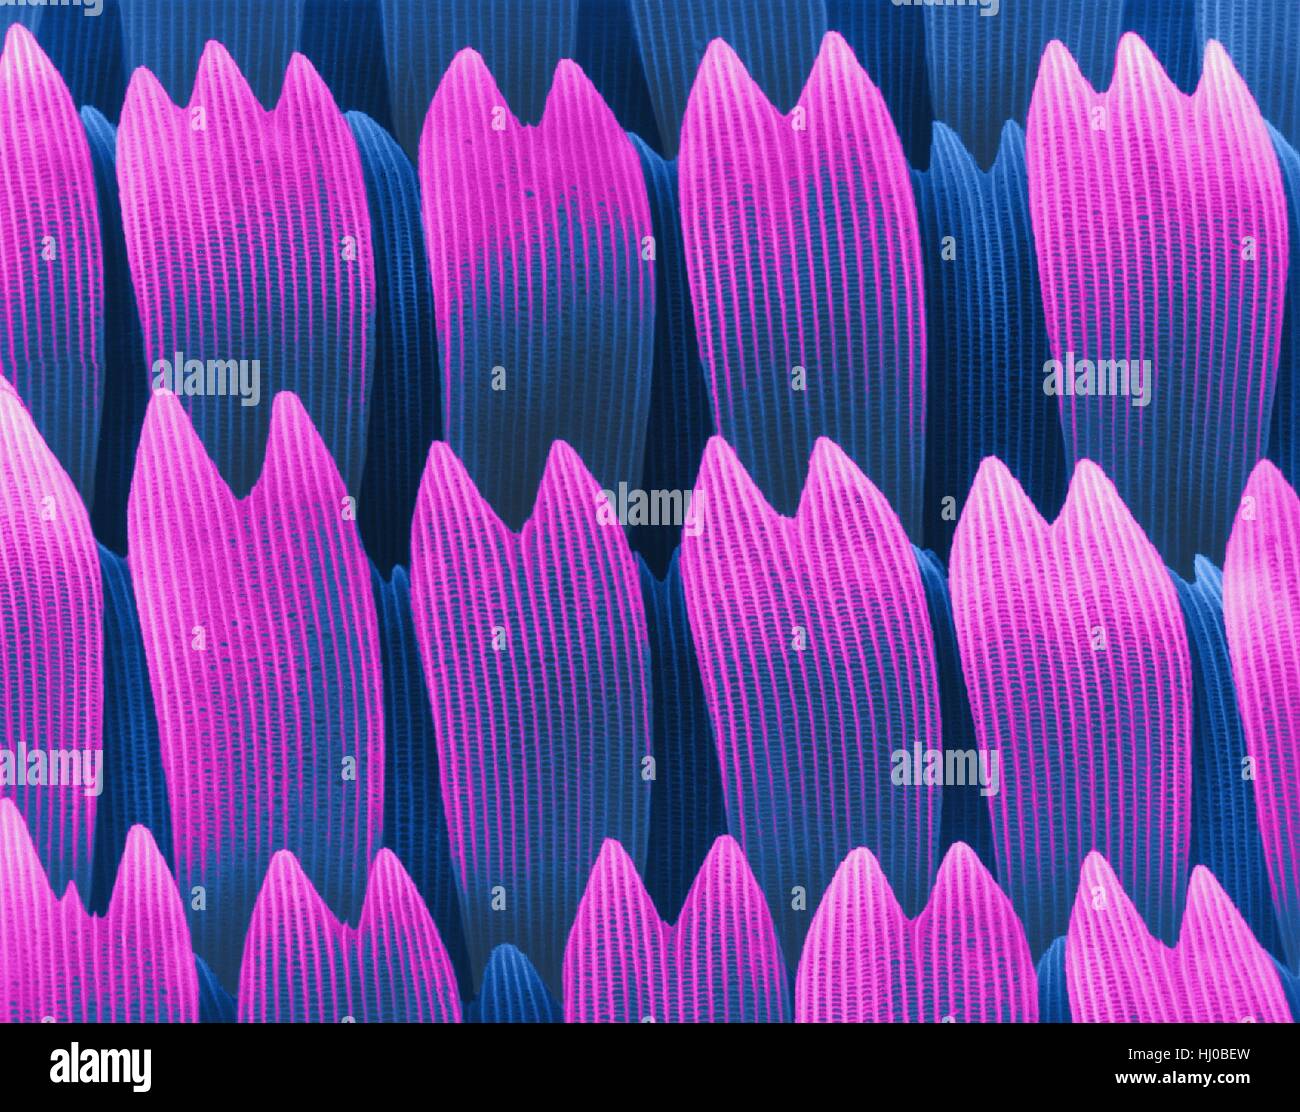 Coloured scanning electron micrograph (SEM) of Swallowtail butterfly wing scales (Papilio rutulus).The western tiger swallowtail (Papilio rutulus) is common swallowtail butterfly in family Papilionidae.It is prominent in western North America seen in urban parks,gardens,rural woodlands riparian Stock Photo